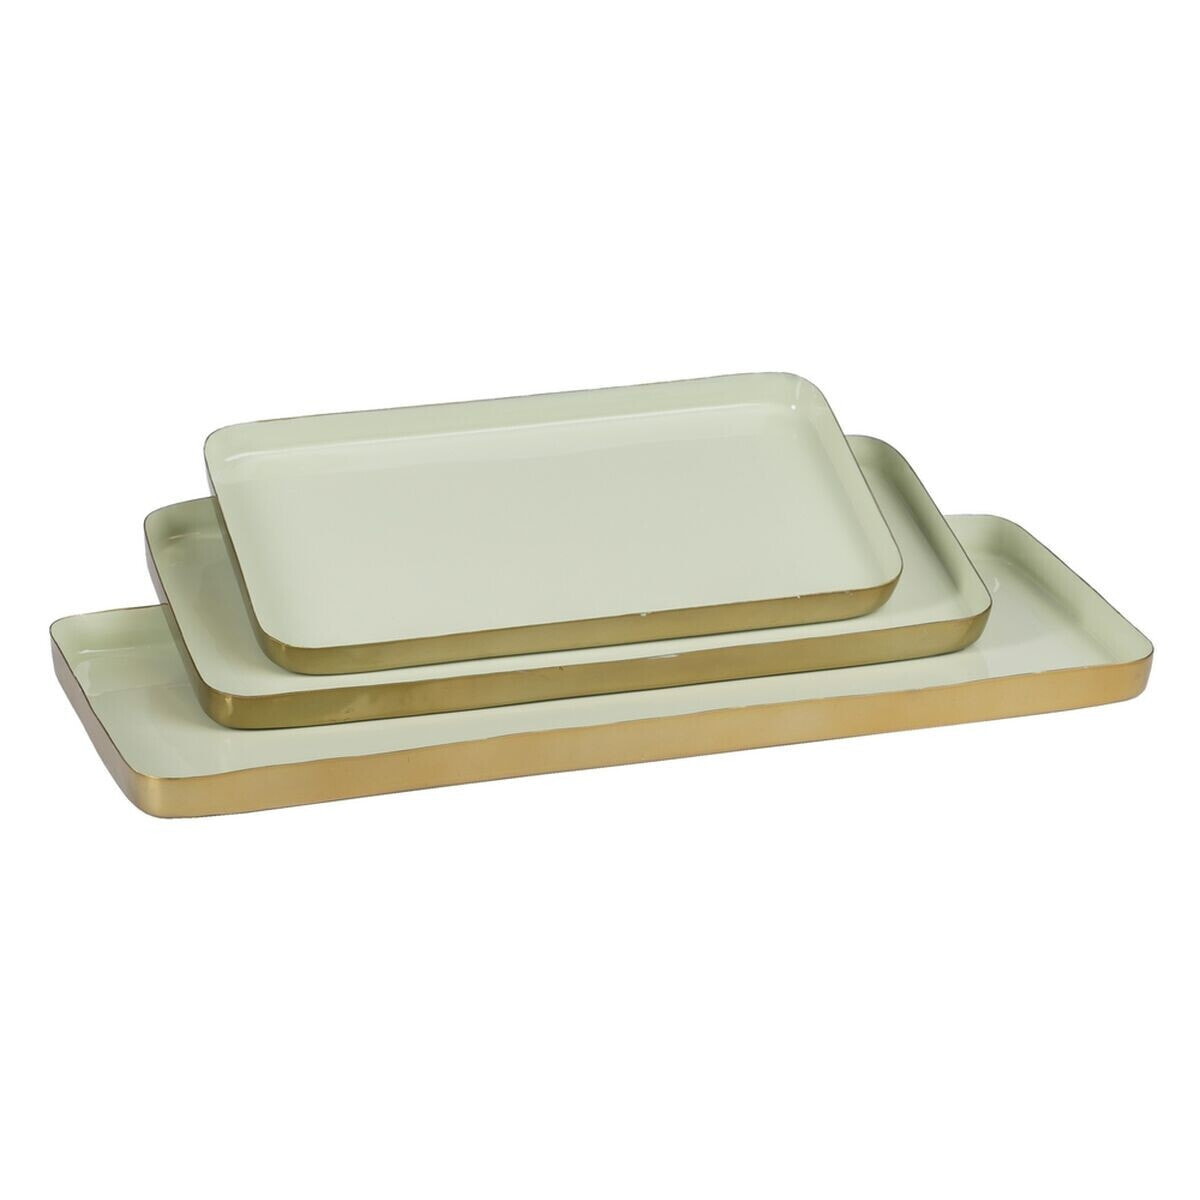 Snack tray 47 x 20,5 x 2 cm Golden Green Iron 3 Pieces